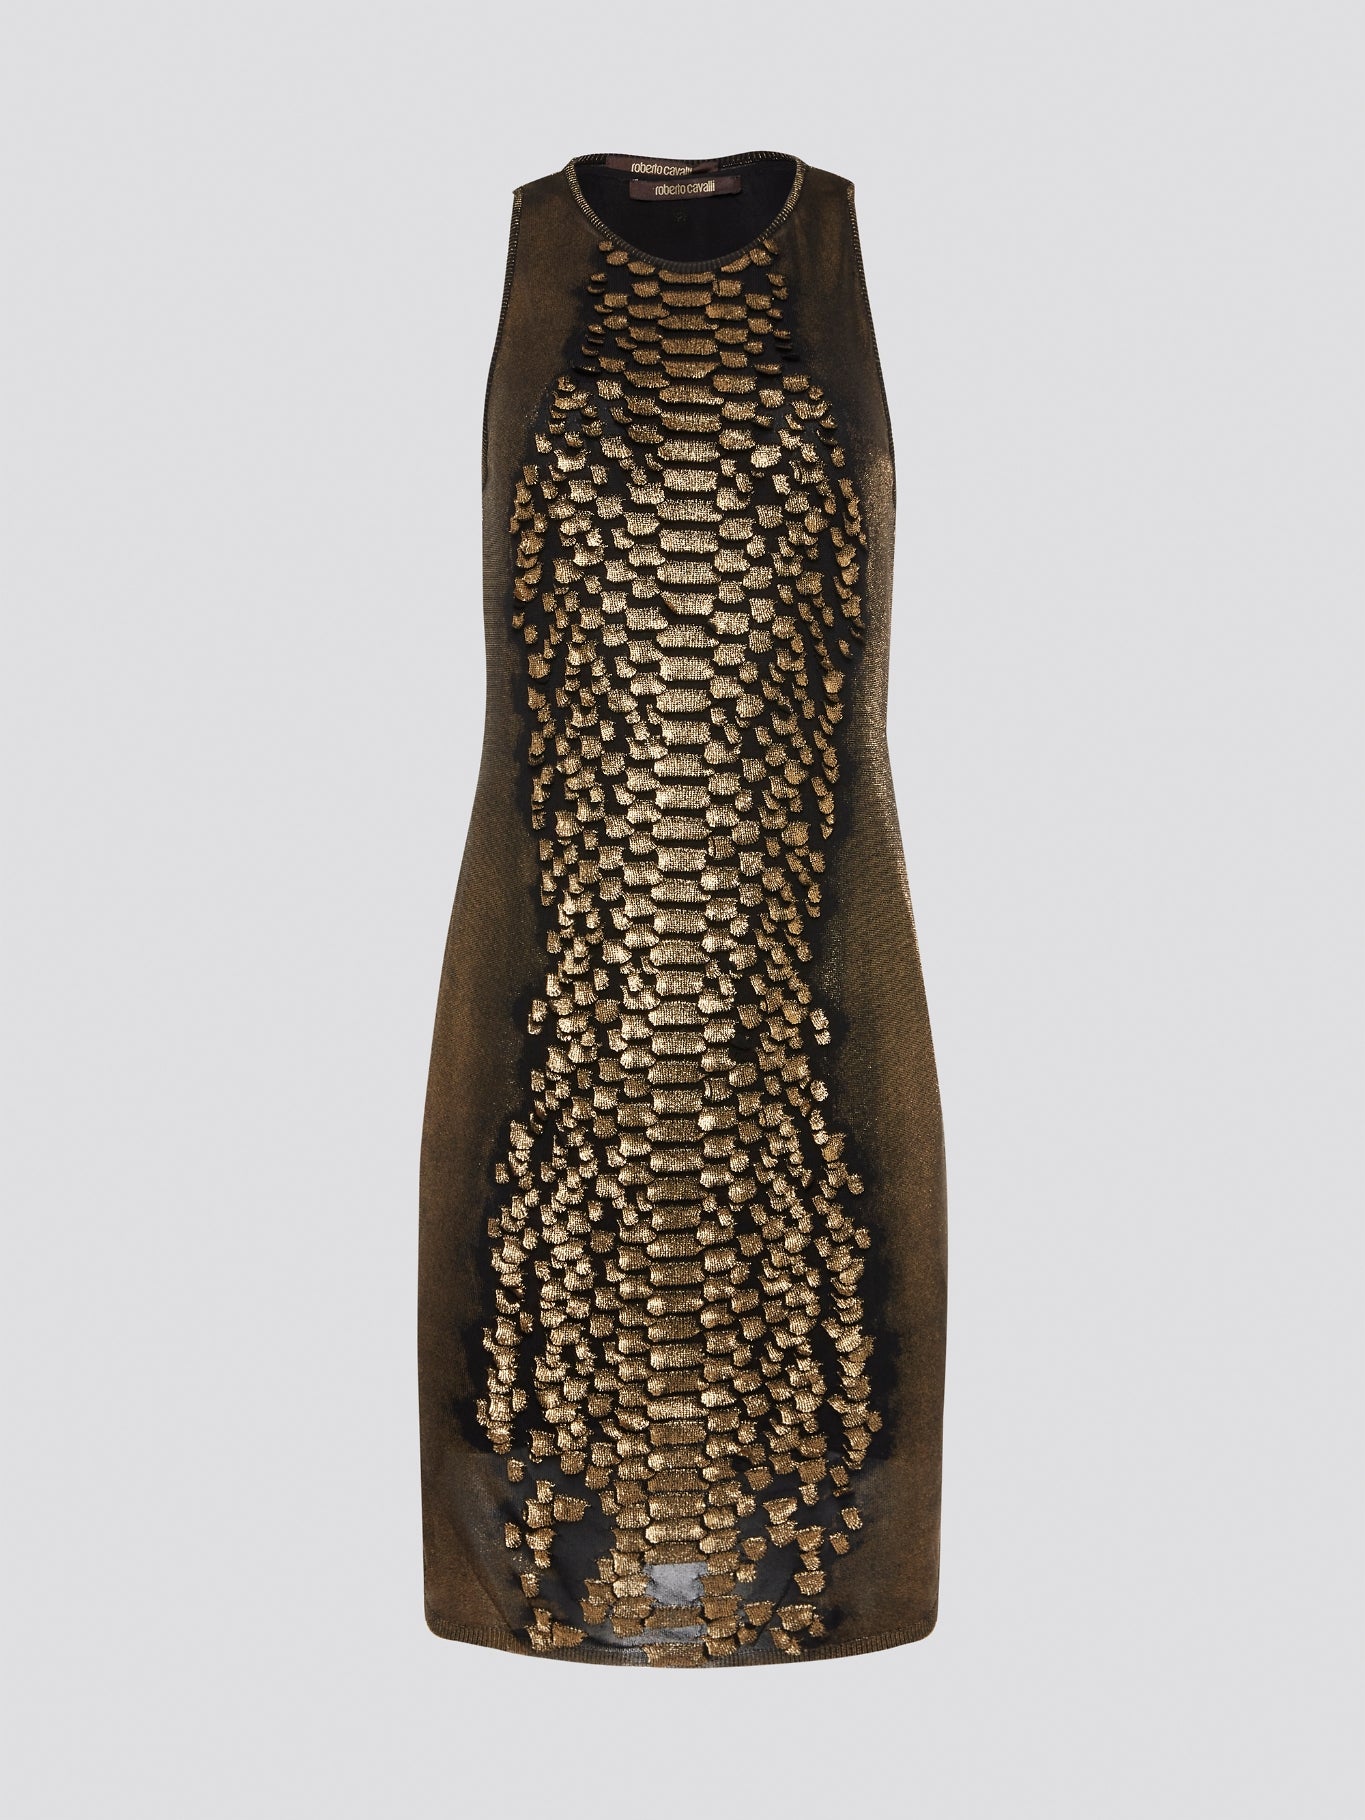 Step into the wild side with the Gold Reptilian Bodycon Dress from Roberto Cavalli. This eye-catching silhouette is adorned with a luxurious reptile print that will turn heads wherever you go. Perfect for a night out on the town, this dress is sure to make you feel like a dazzling diva.